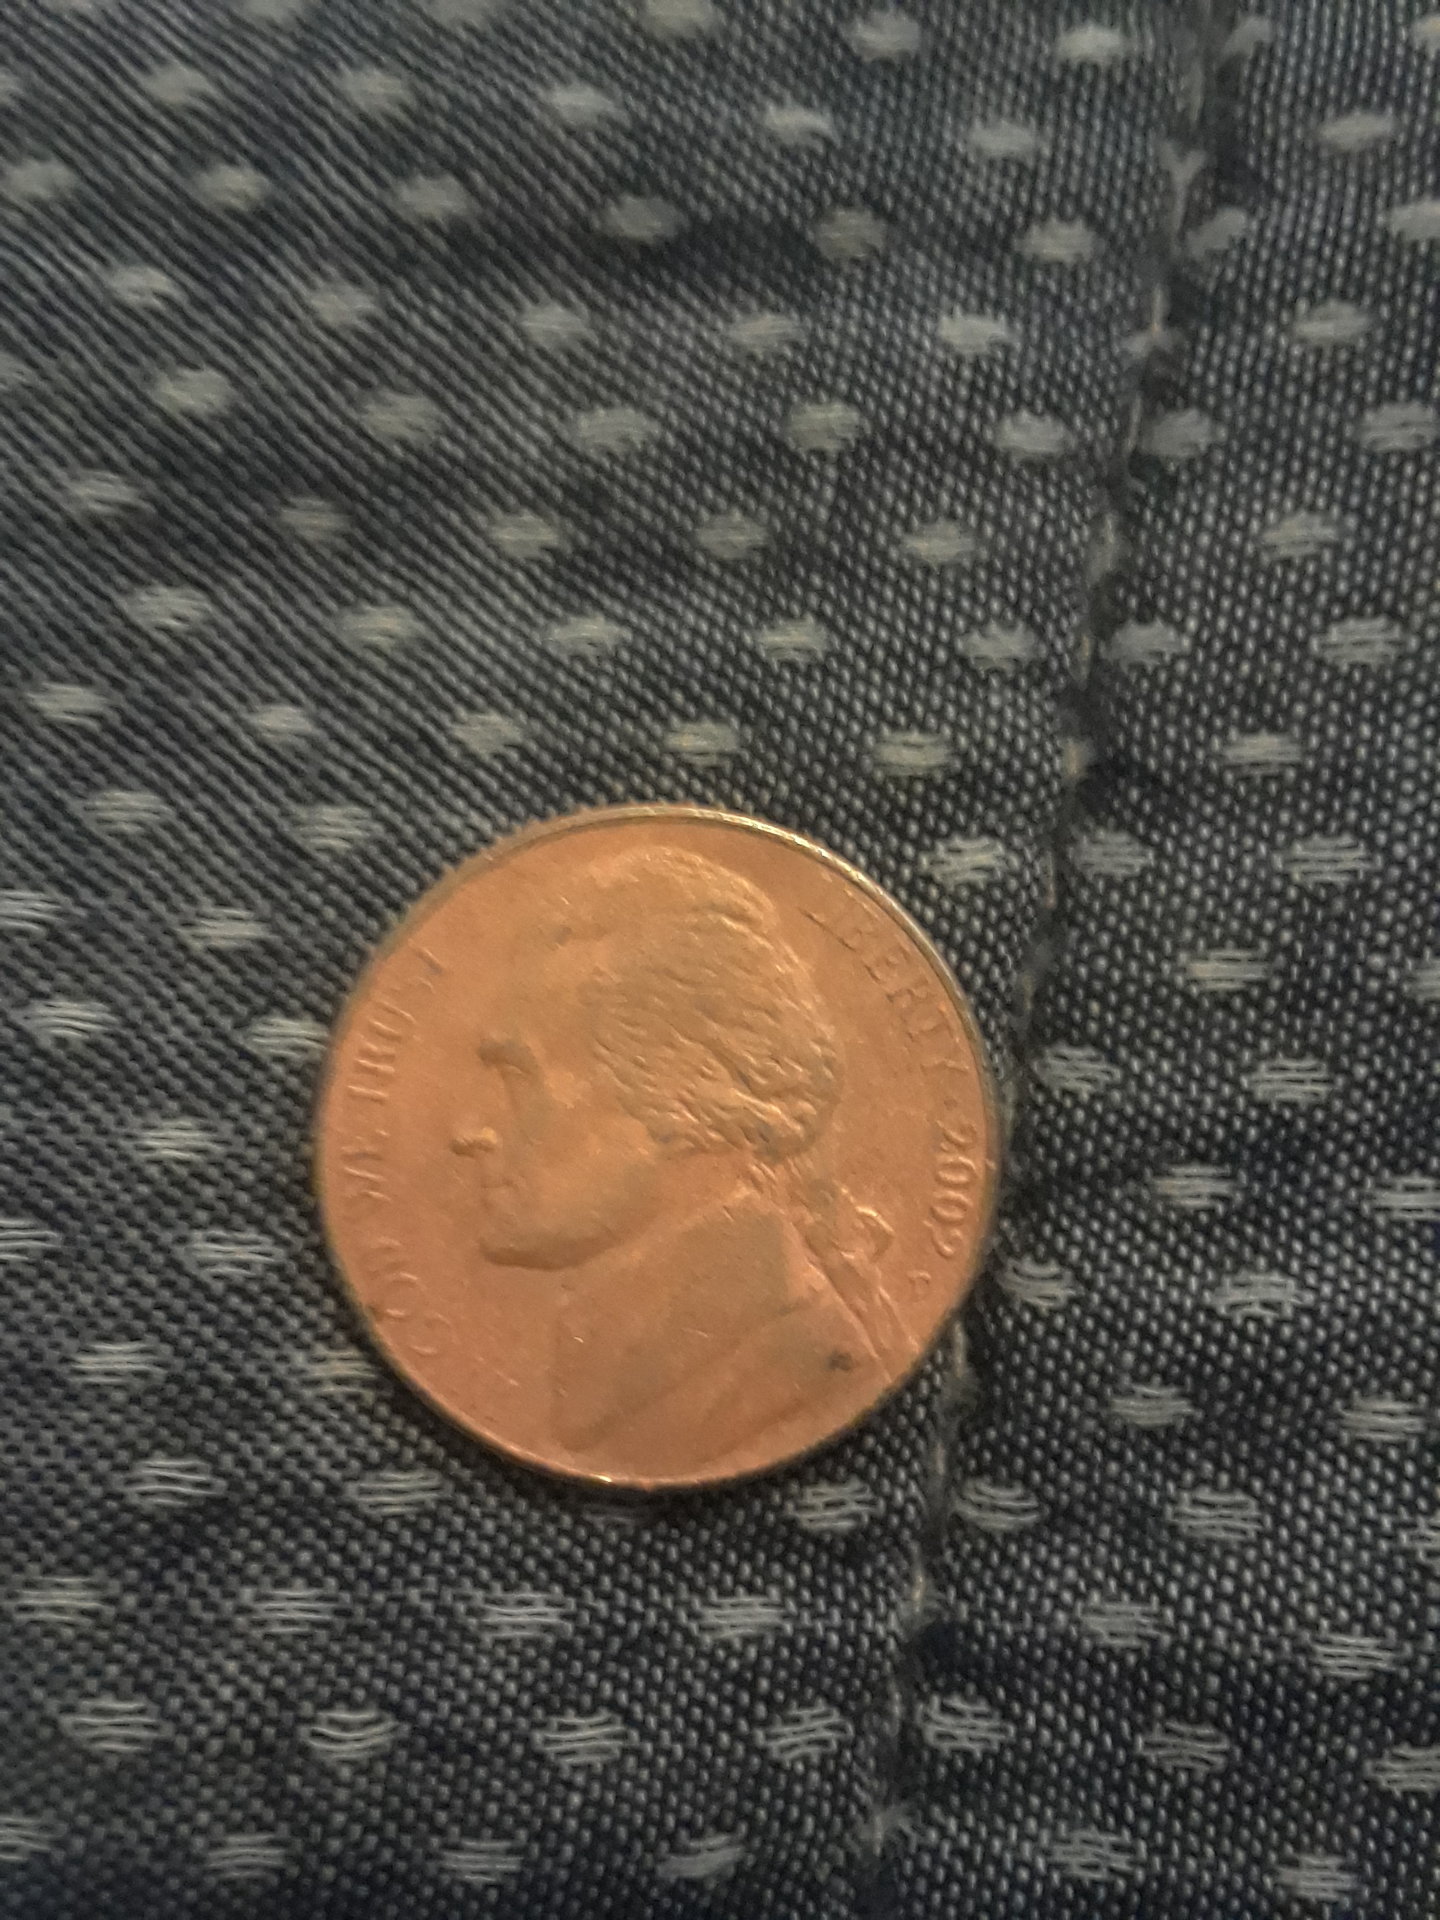 Does Cleaning Coins Decrease Their Value?